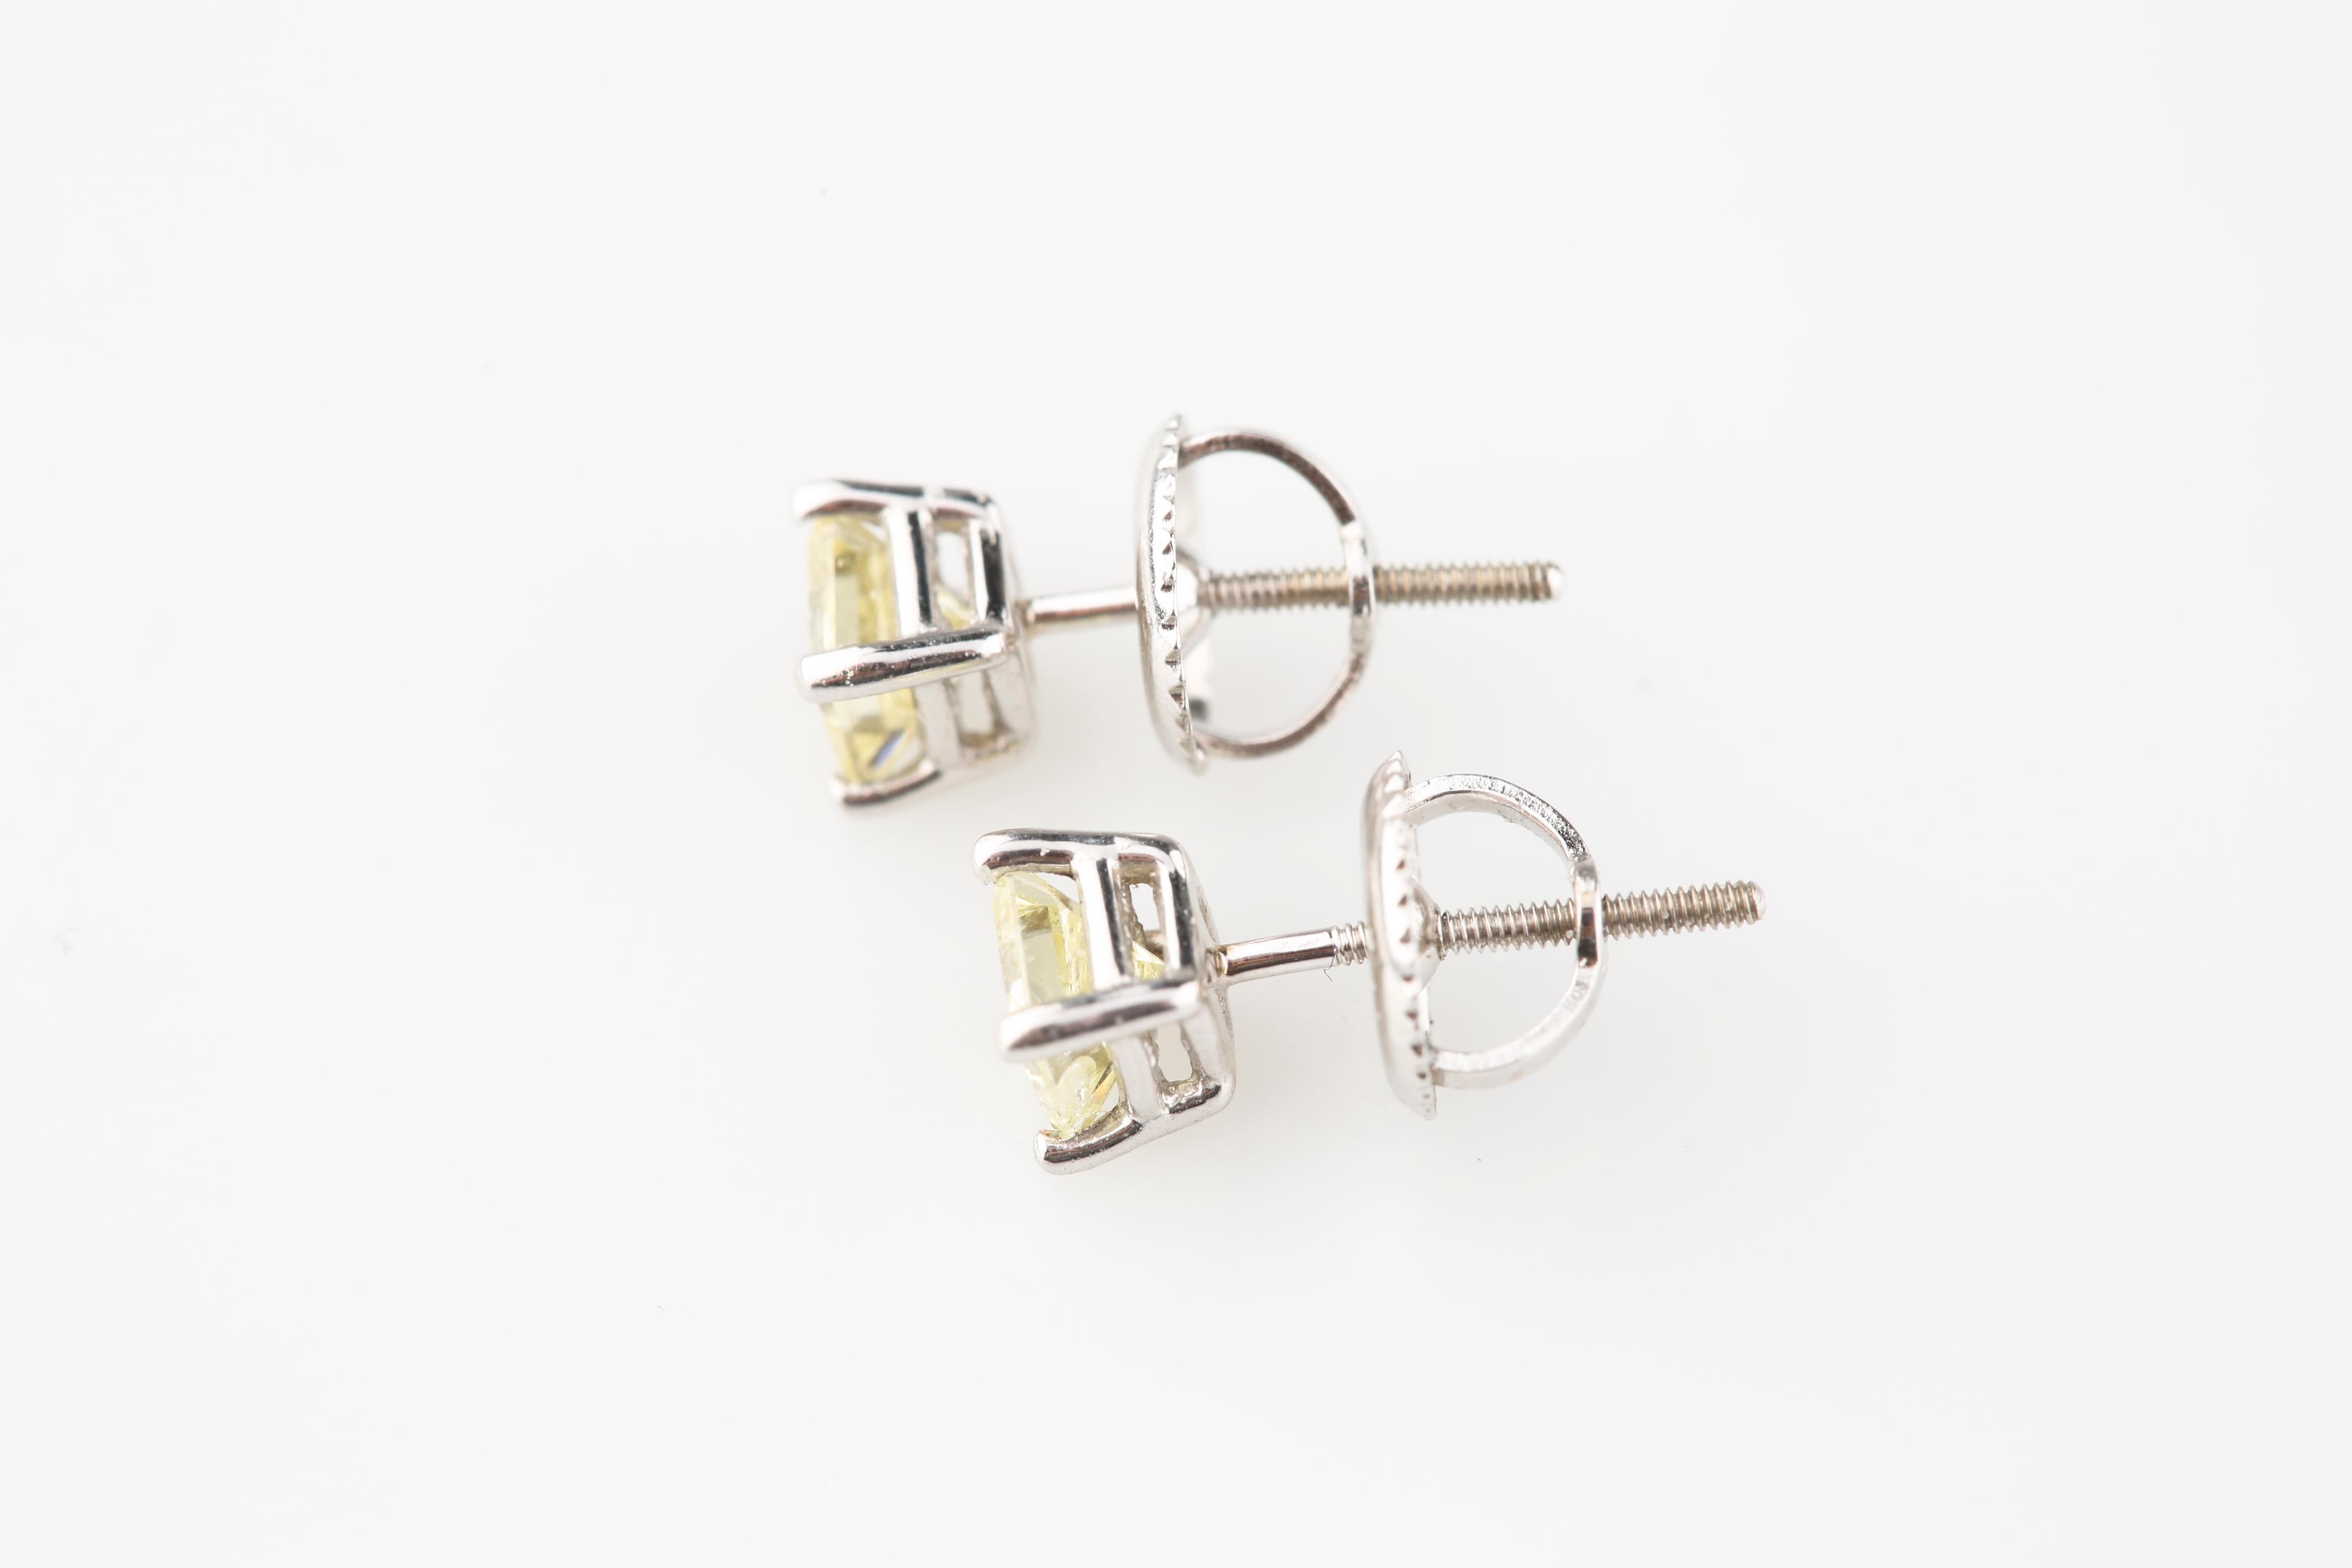 Gorgeous 14k White Gold Princess Diamond Stud Earrings
Total Diamond Weight = 0.64 Ct
Color = Q
Clarity = I1
Adorable Earrings!
Total Mass = 0.96 grams